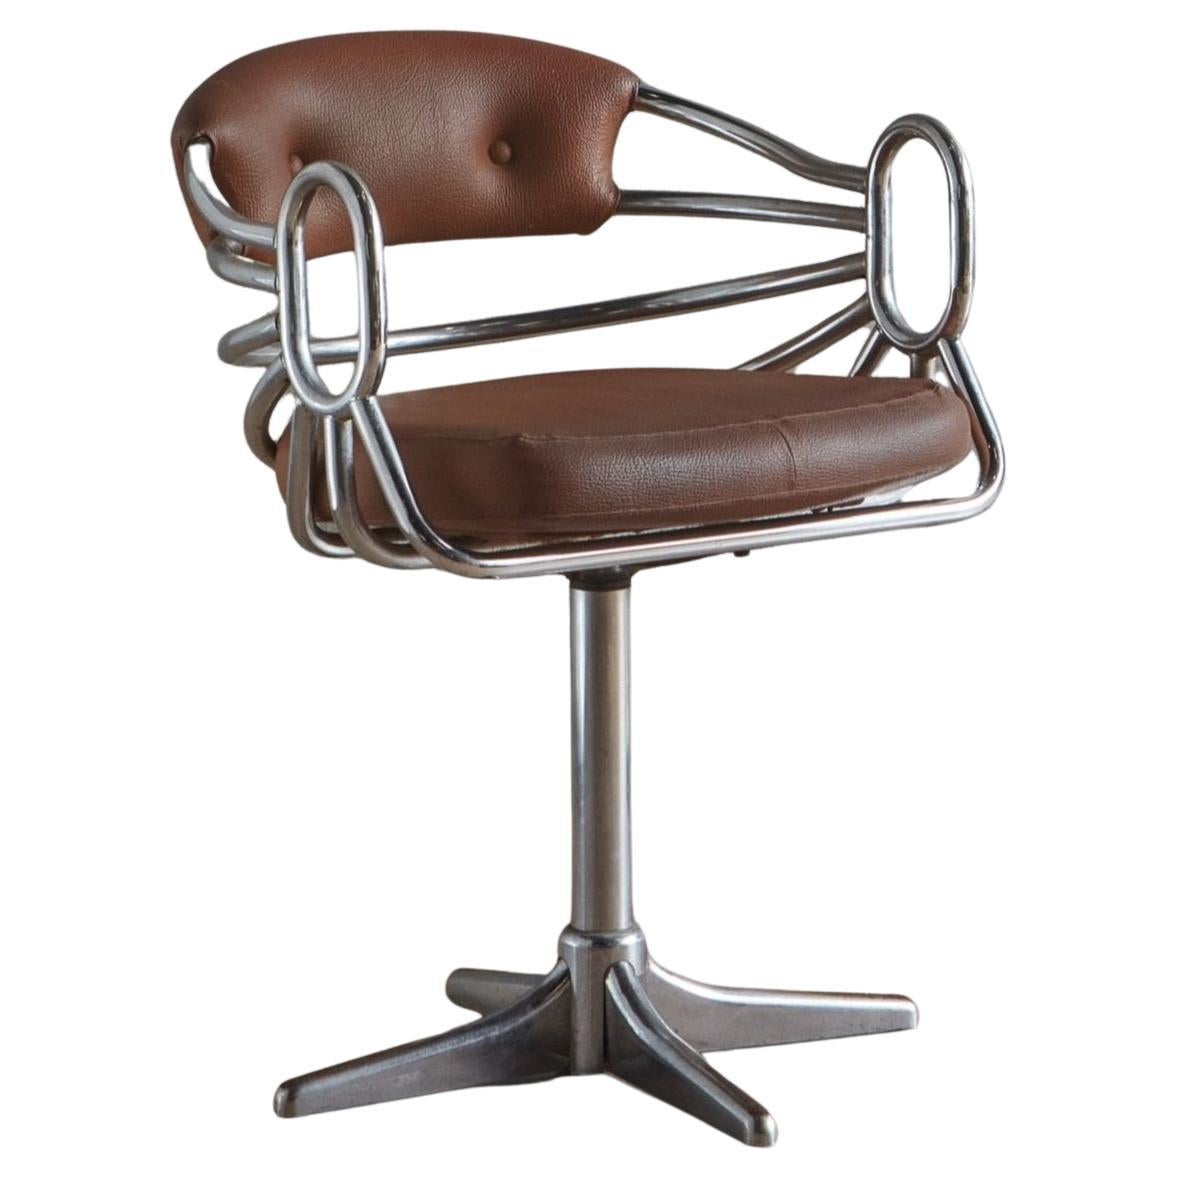 Chrome Swivel Desk Chair in Brown Leather, Italy 1960s - 2 Available For Sale